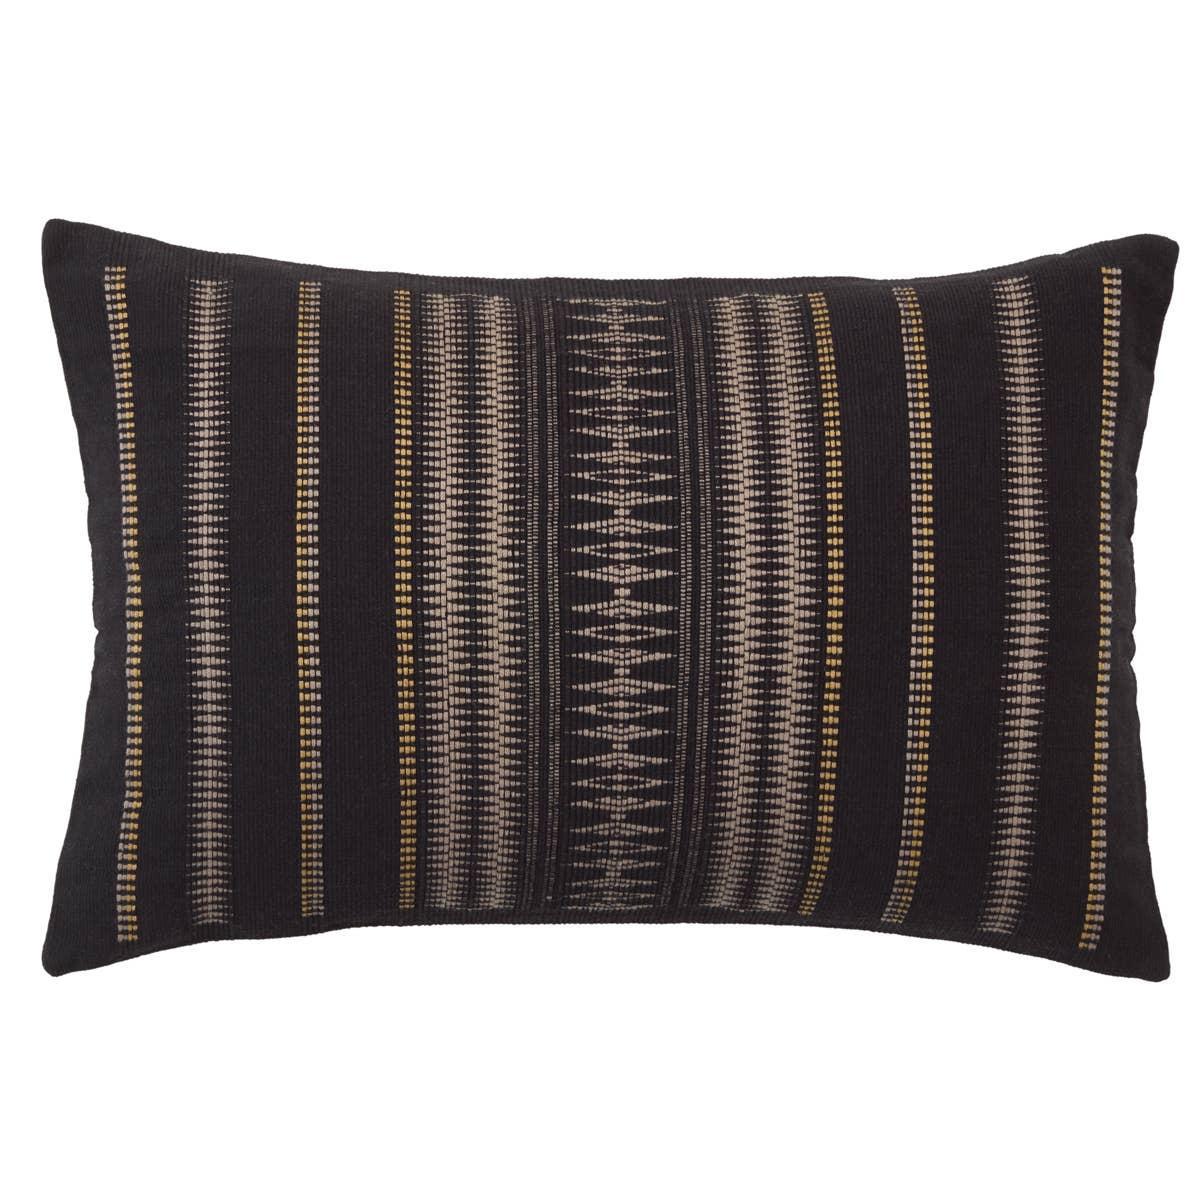 Handmade by weavers in Nagaland, India, the Nagaland Dzukou showcases the traditional loin-loom techniques of the indigenous tribes of the region. The artisan-made Dzukou throw pillow effortlessly combines heritage-rich tribal and stripe patterns with a black, taupe, and gold colorway for a stunning statement in any space. Amethyst Home provides interior design, new home construction design consulting, vintage area rugs, and lighting in the Salt Lake City metro area.